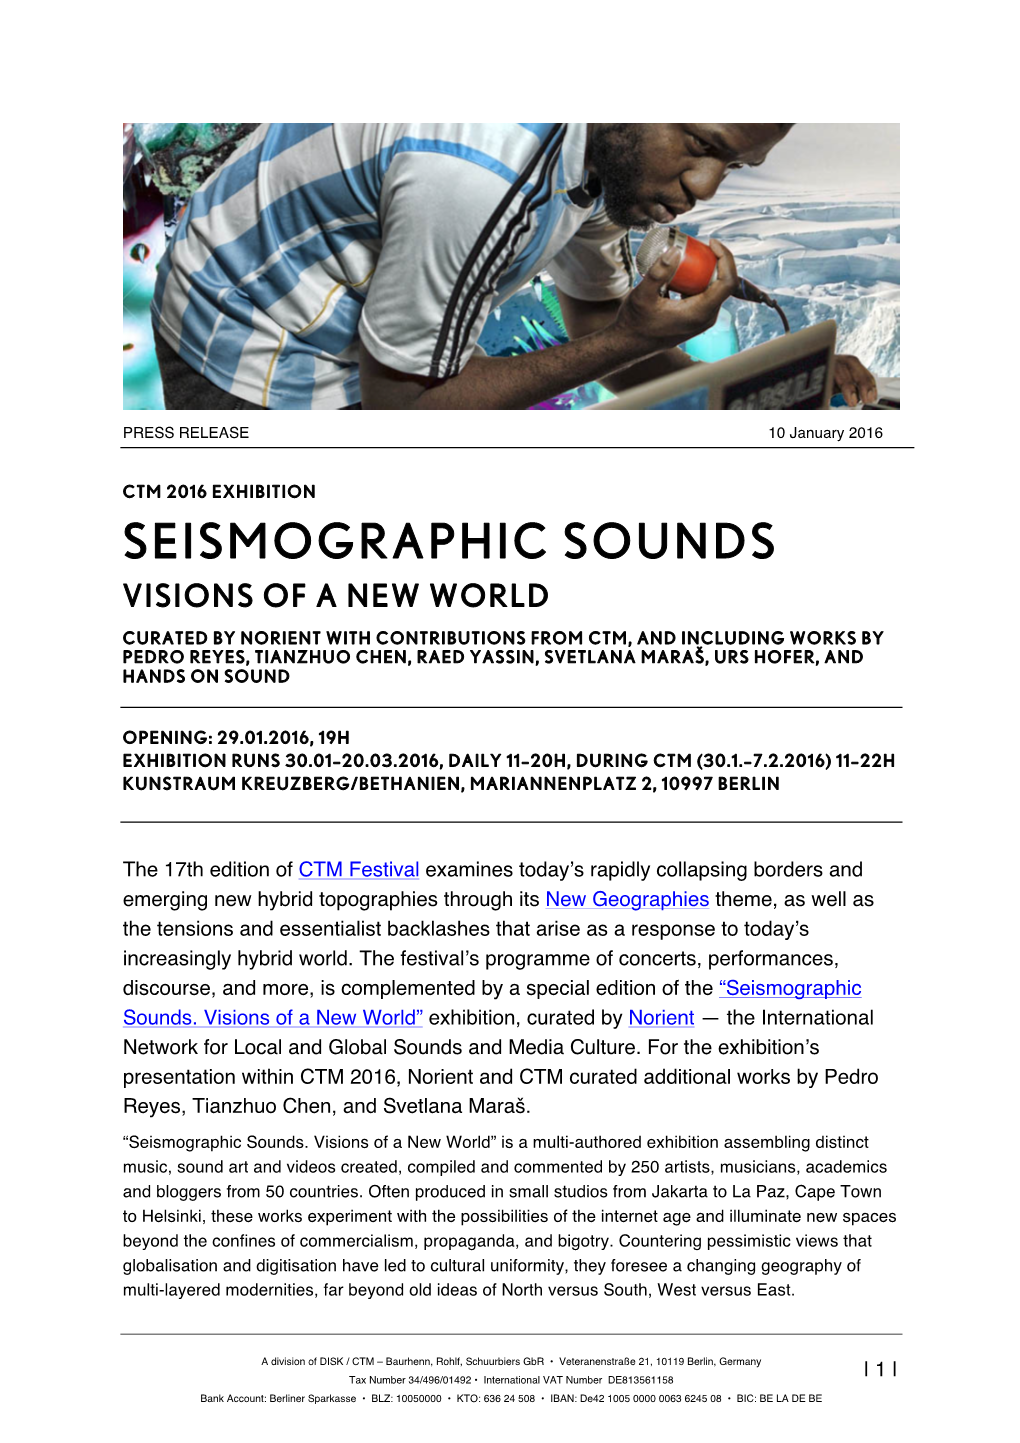 Seismographic Sounds Visions of a New World